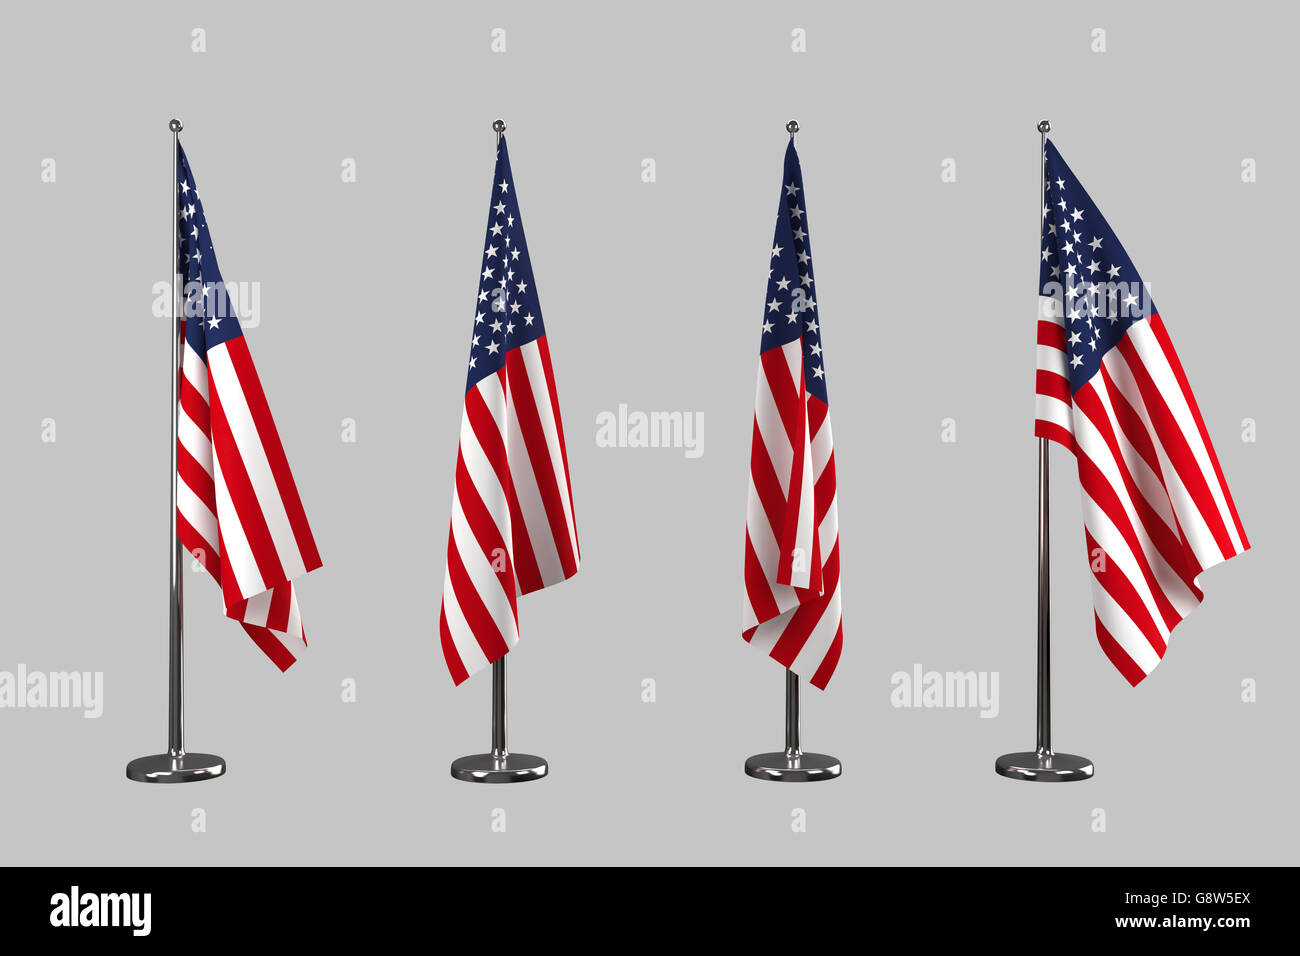 USA indoor flags isolate on white background Stock Photo